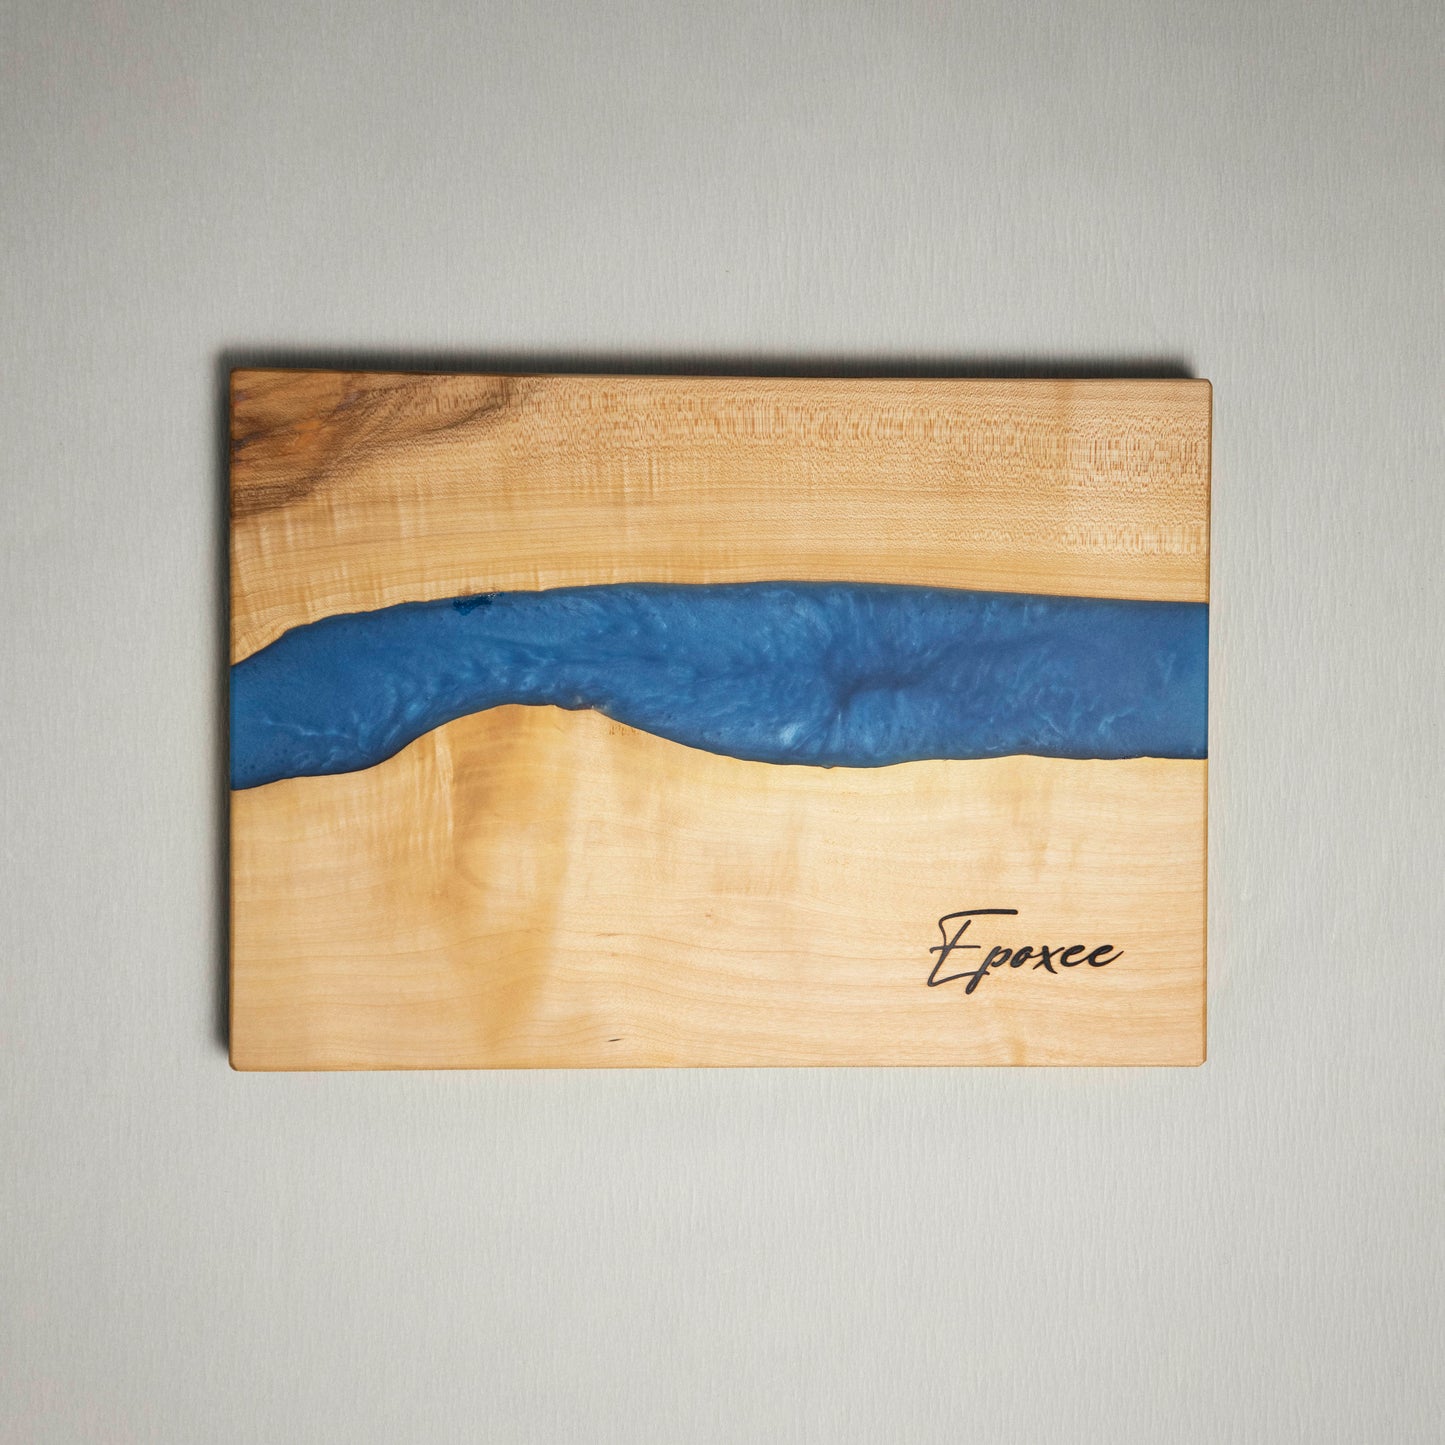 Serving board made from wood and epoxy resin in the color deep saphire